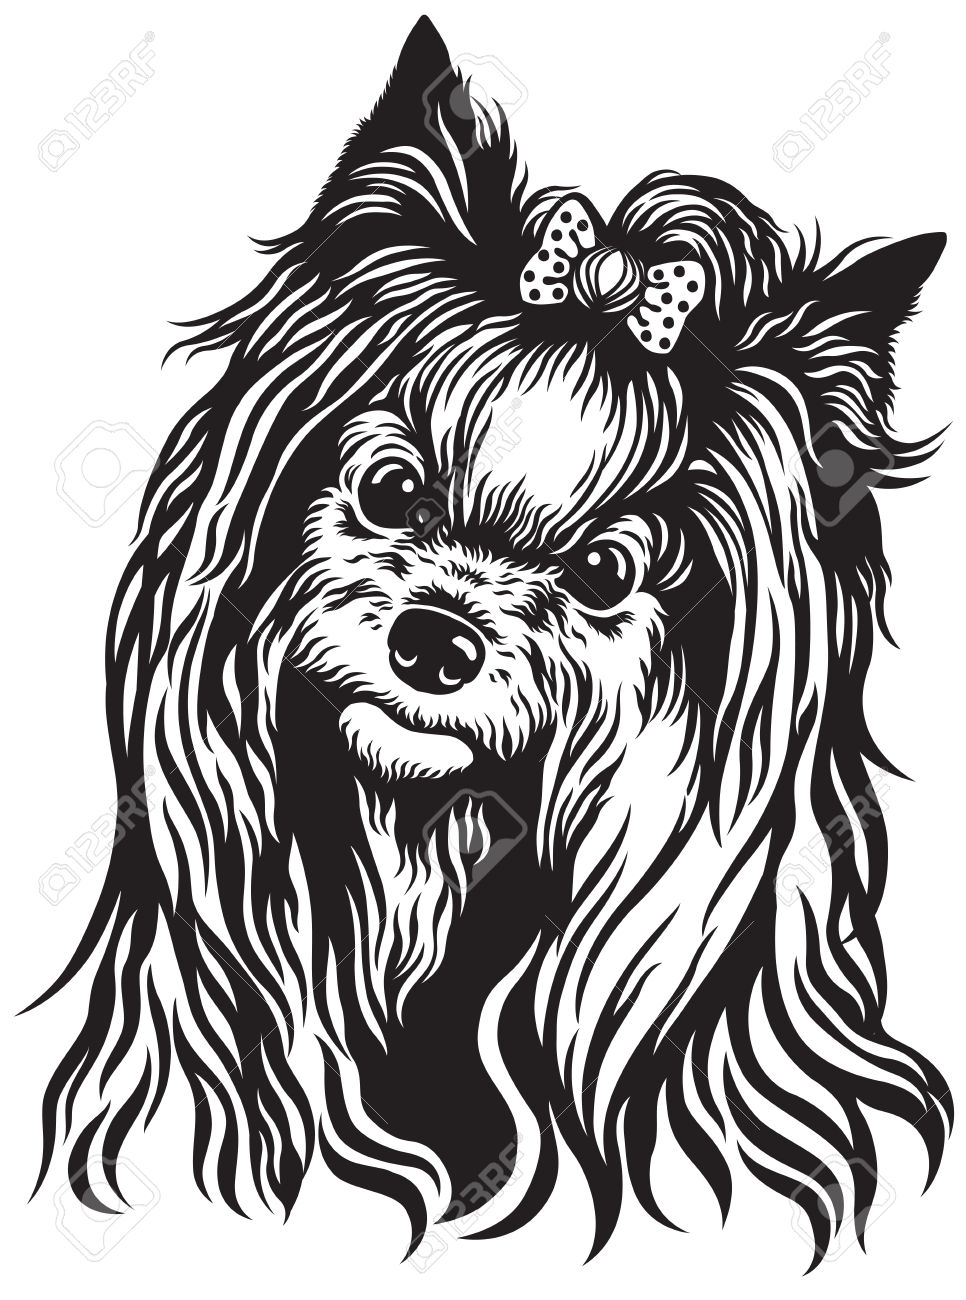 Yorkshire Terrier clipart #7, Download drawings